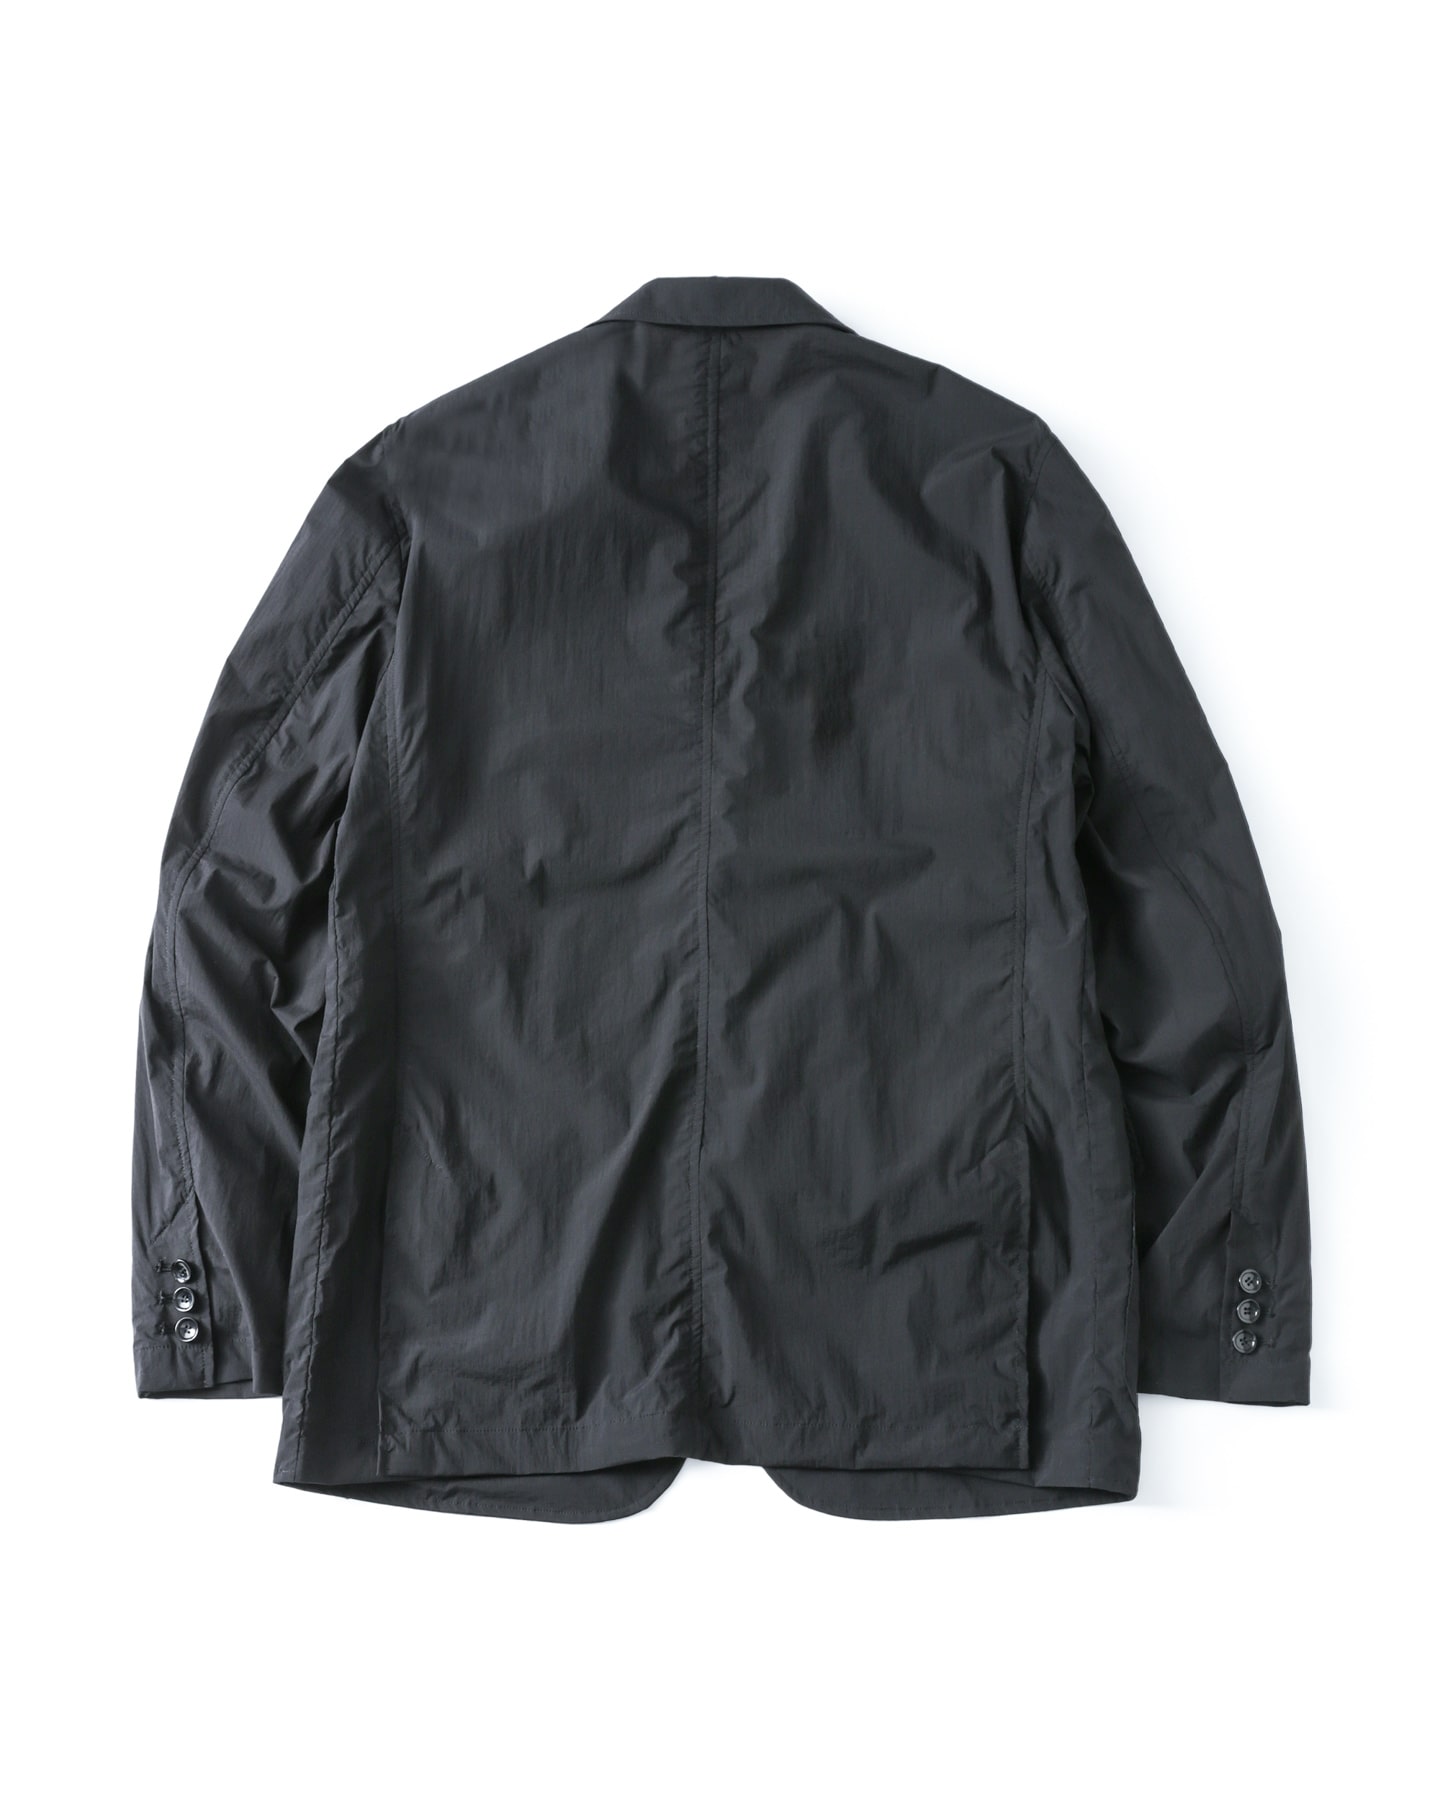 SOPH. | LIGHT WEIGHT STRETCH RIP STOP PACKABLE 2B JACKET(M BLACK):